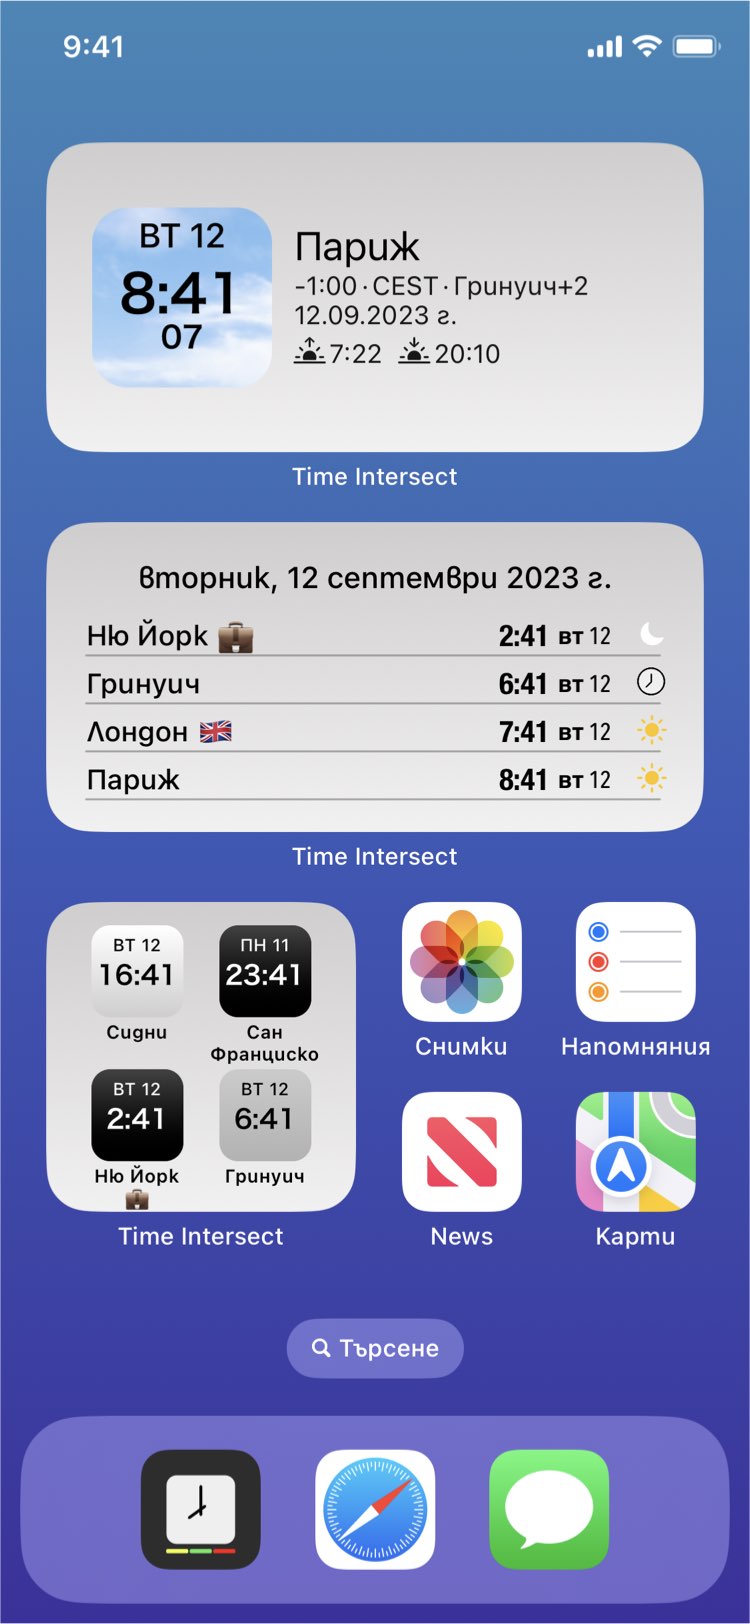 Time Intersect - قم بتهيئته بأي طريقة تريد!